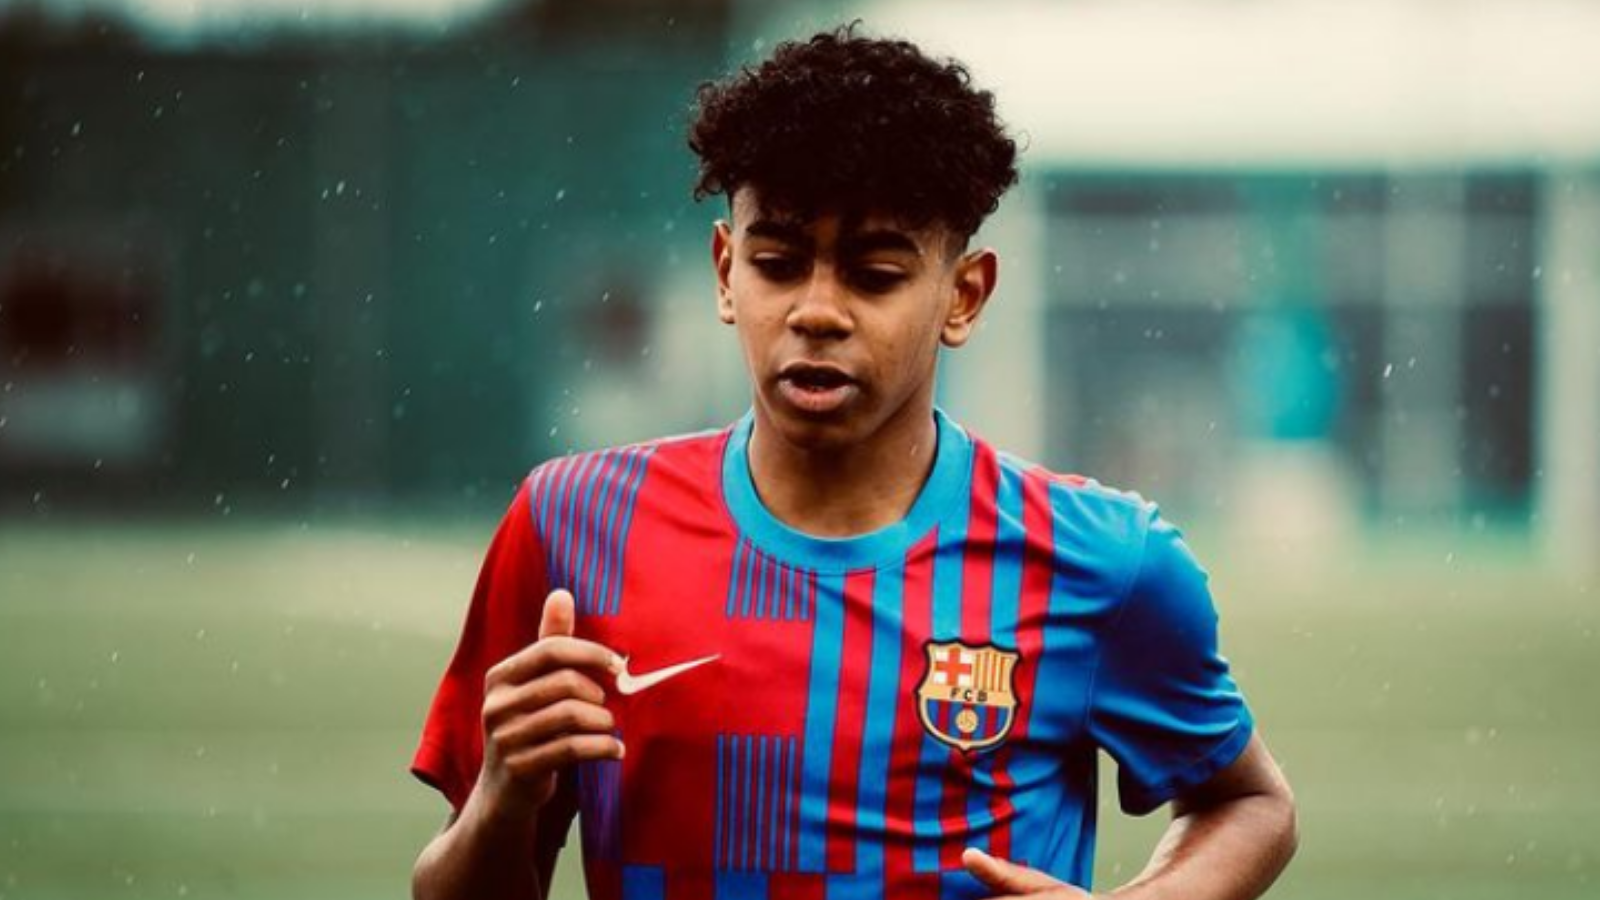  Lamine Yamal is a young soccer player who plays for FC Barcelona.